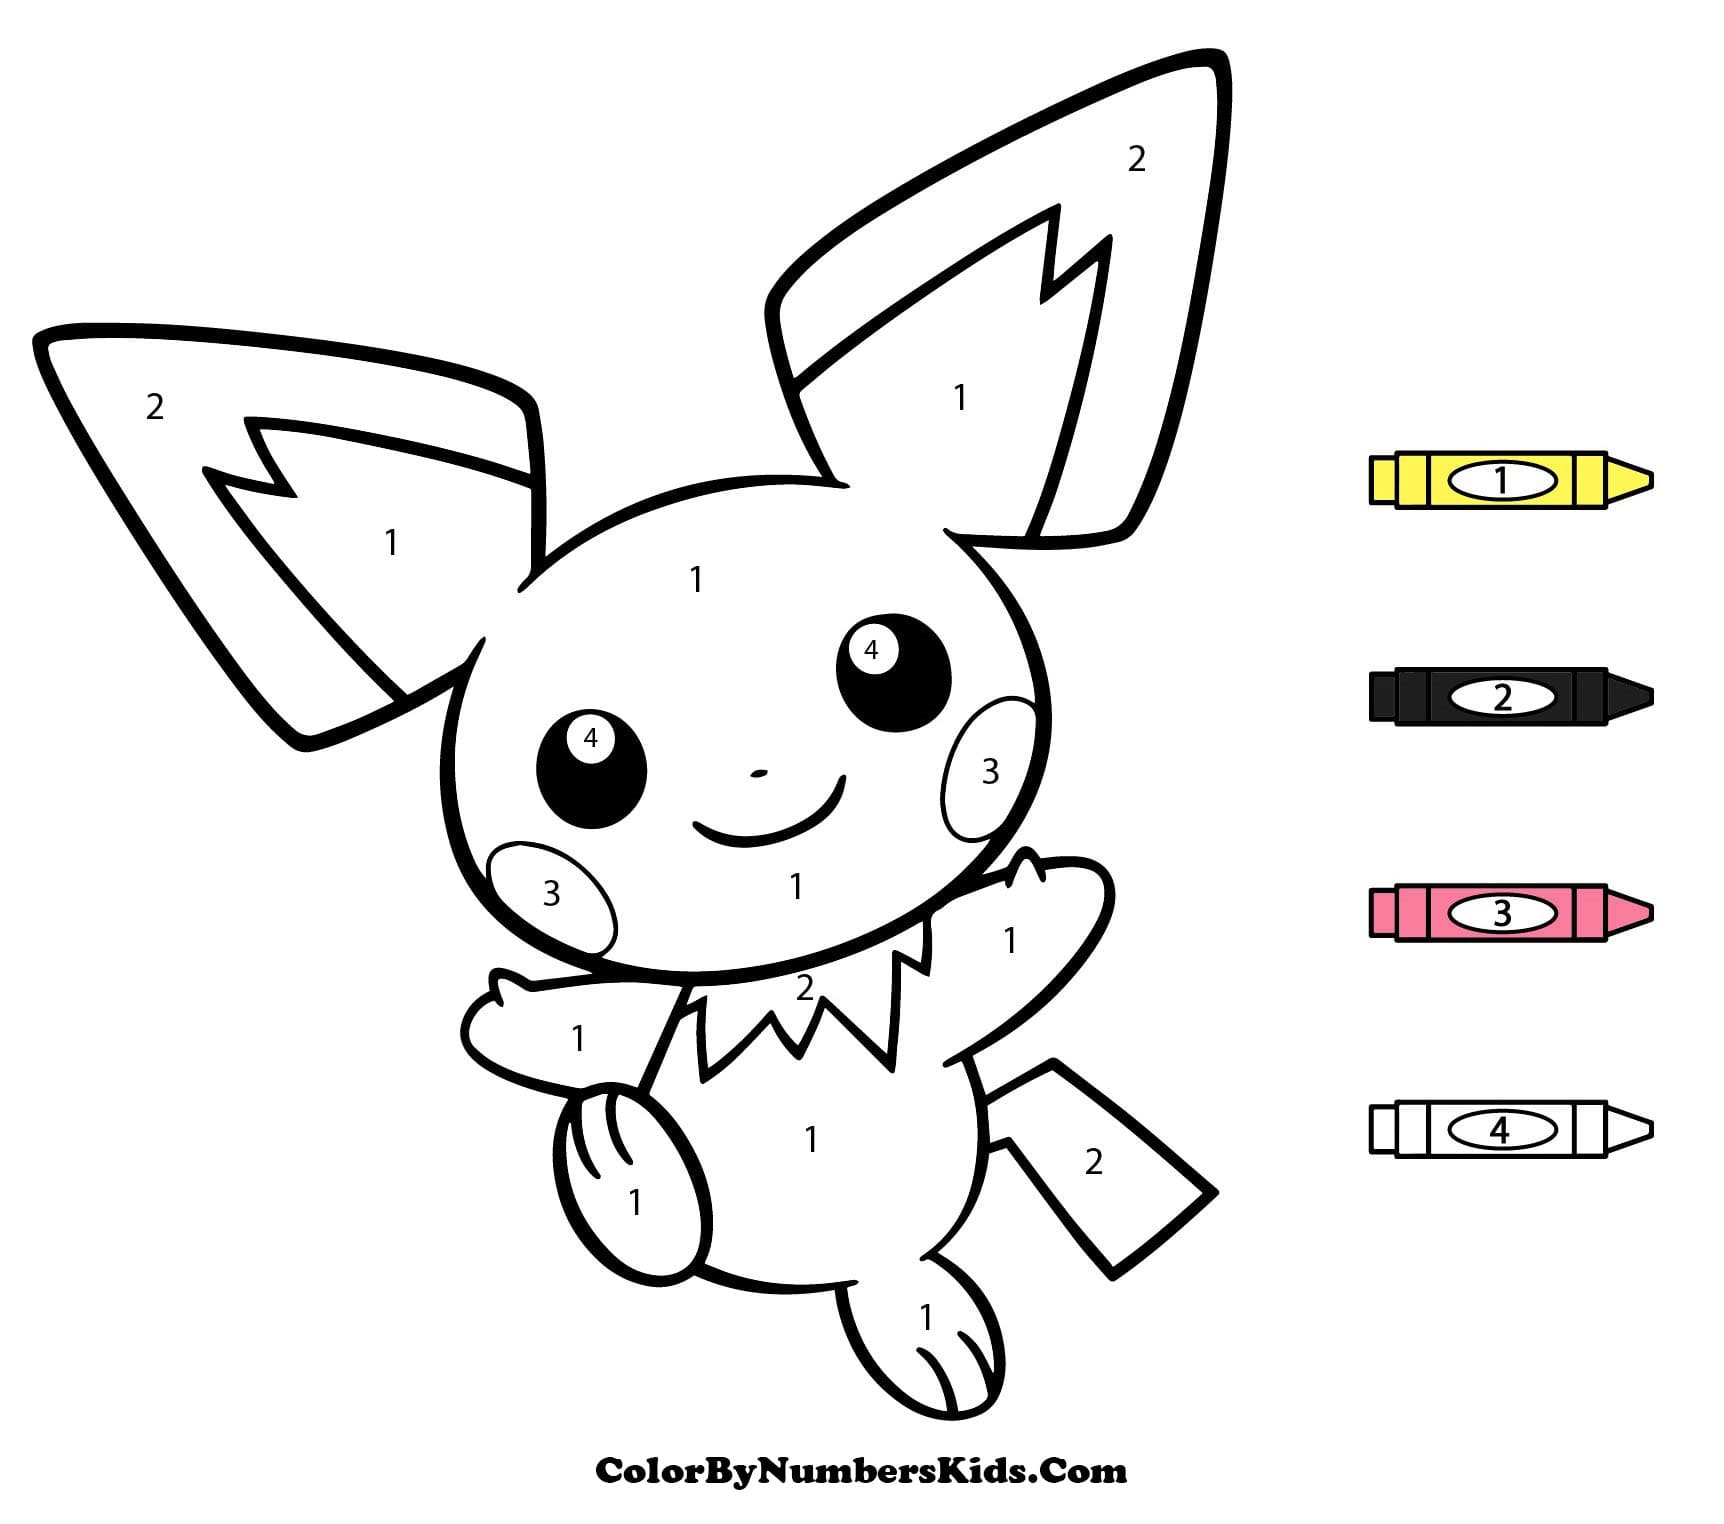 Pichu Pokemon Color By Numbers